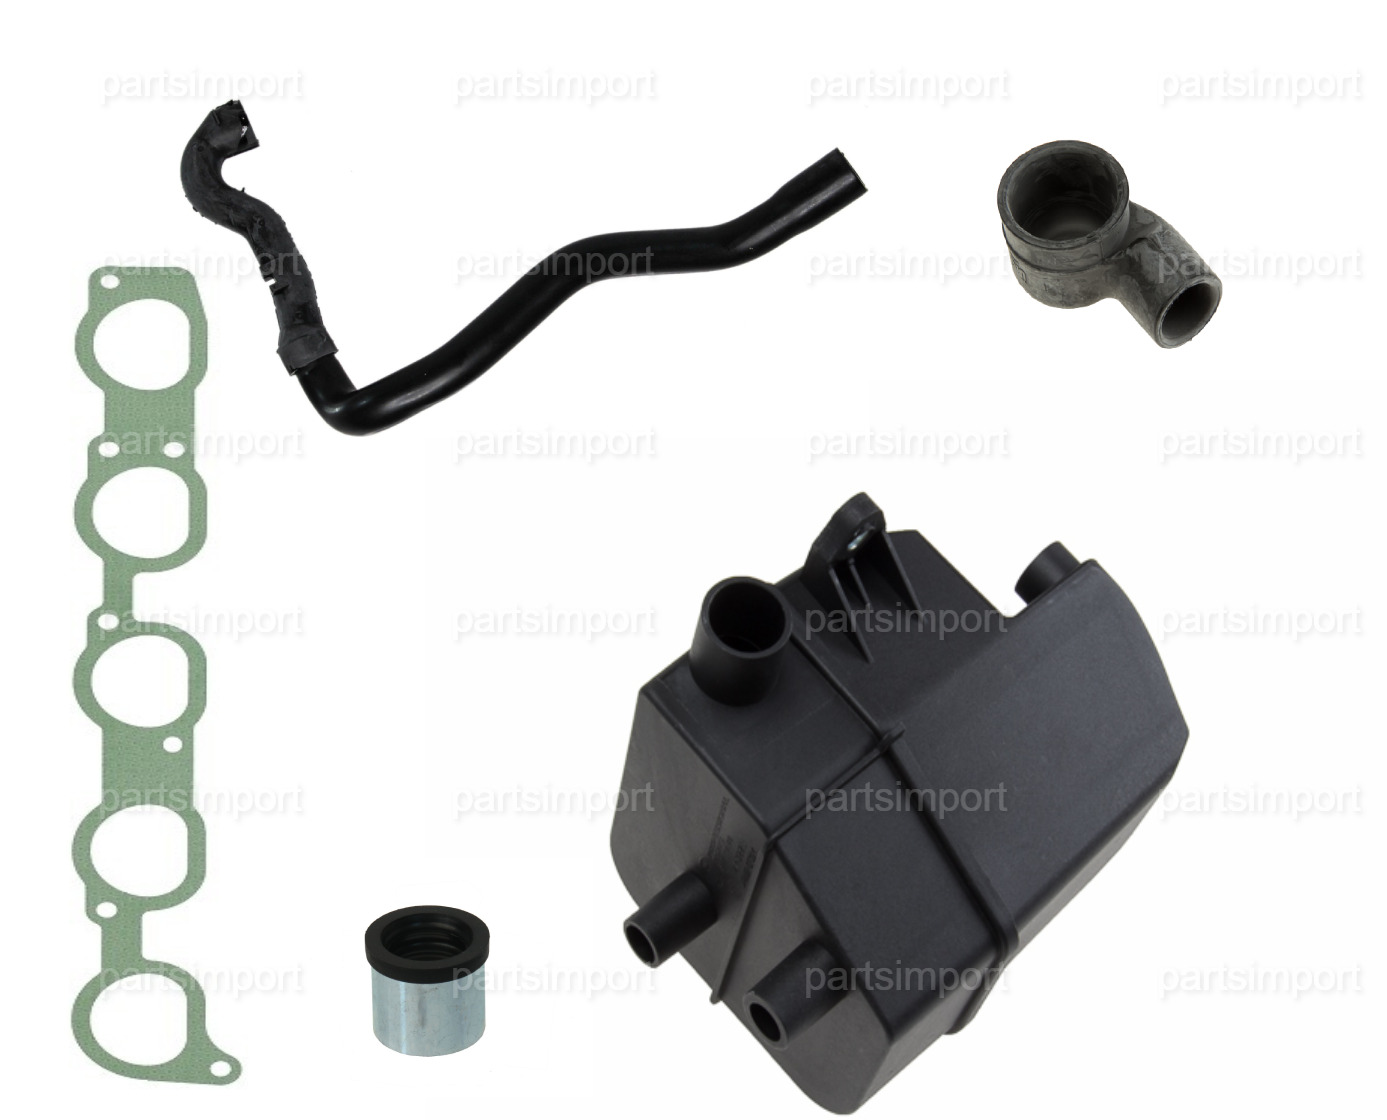 Oil Trap + Oil Trap Hoses + Intake Manifold Gasket for VOLVO S60 S80 XC70